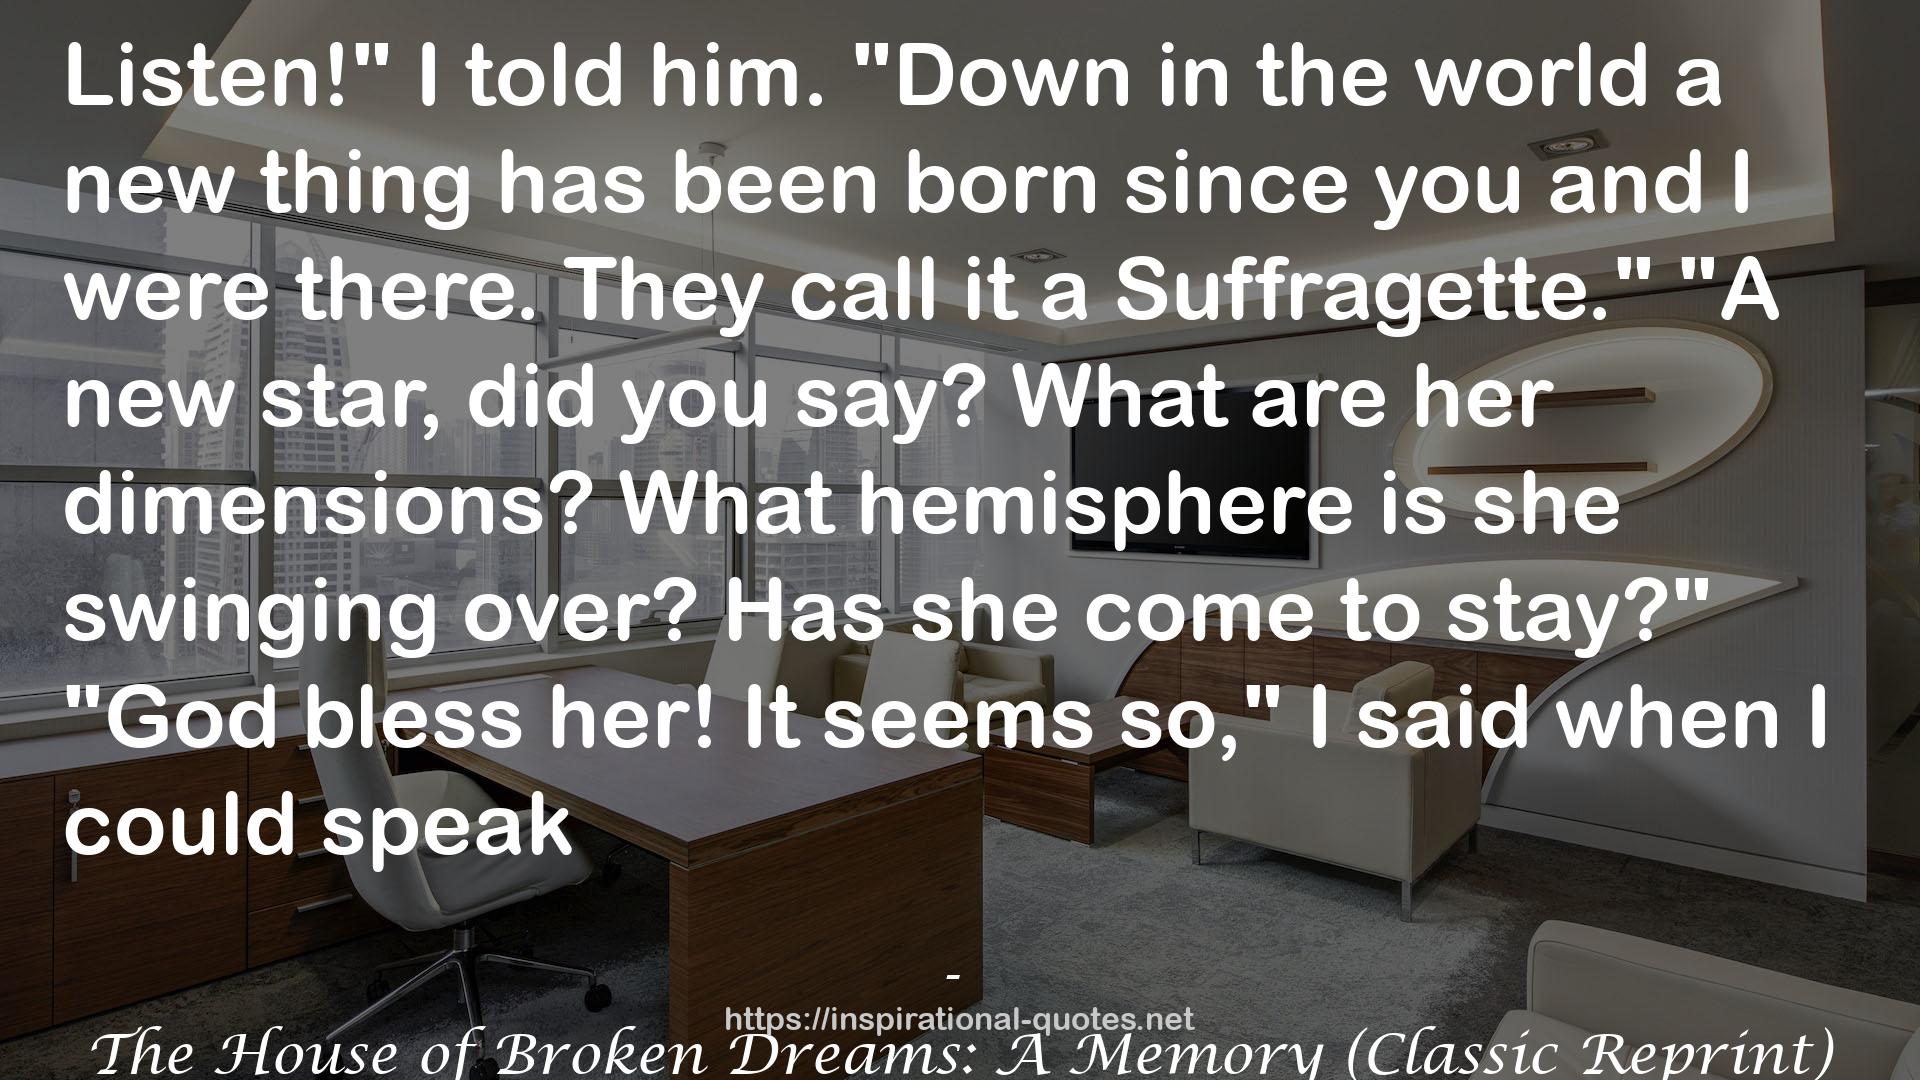 The House of Broken Dreams: A Memory (Classic Reprint) QUOTES